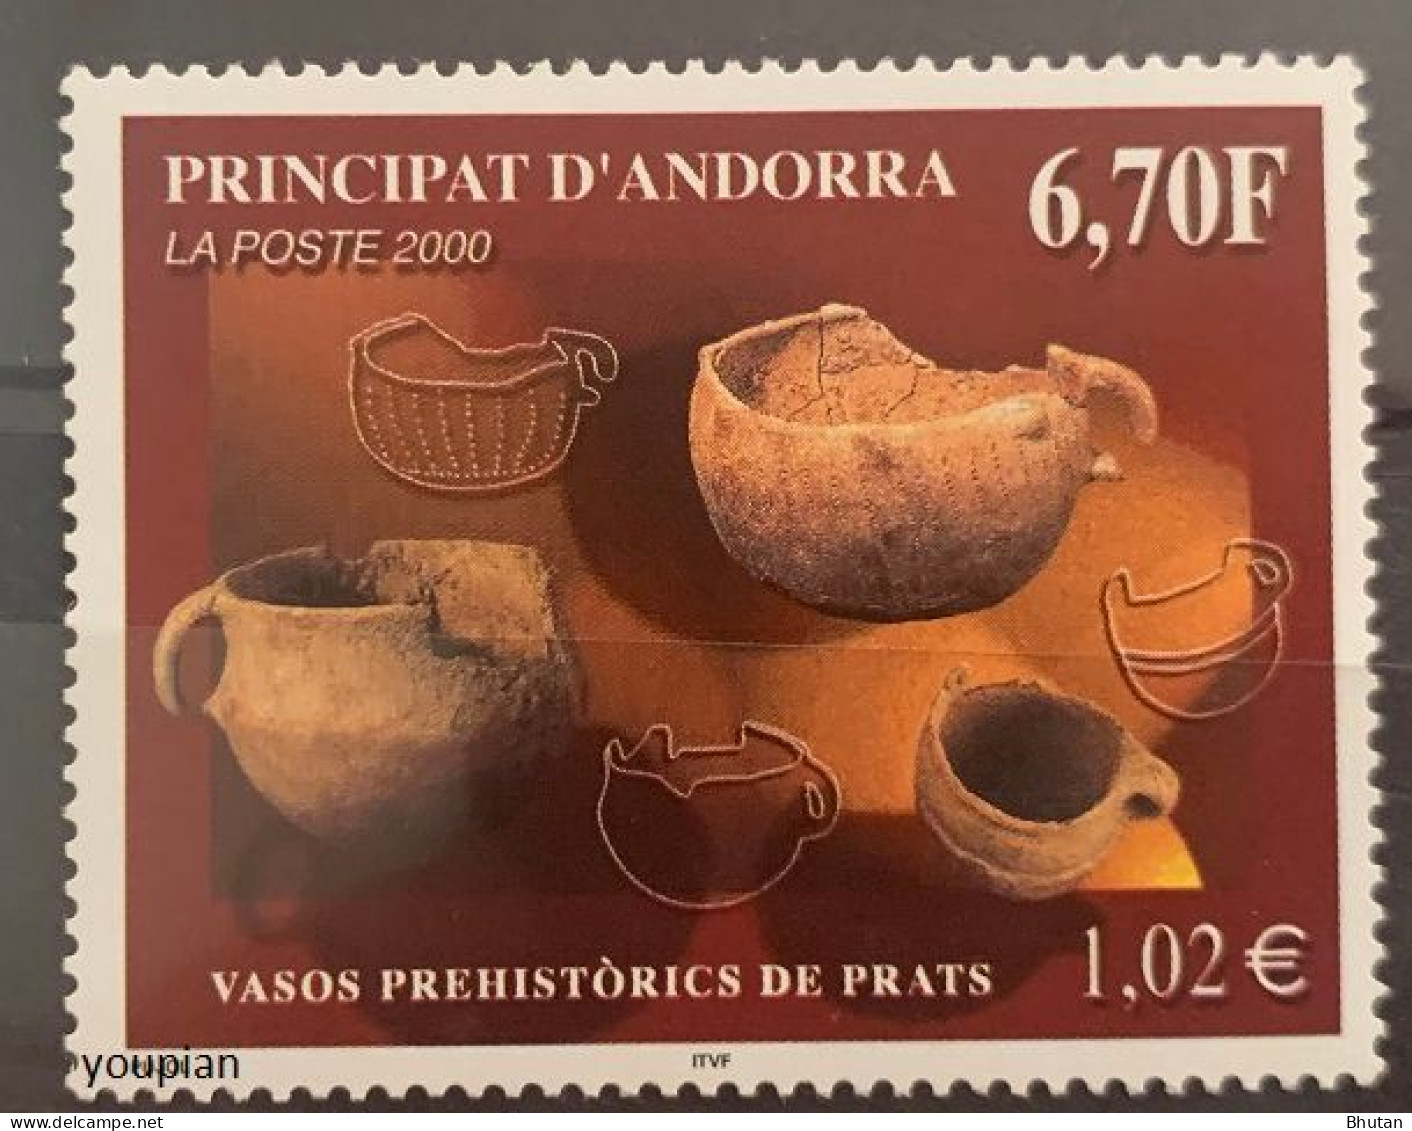 Andorra (French Post) 2000, Pottery, MNH Single Stamp - Neufs